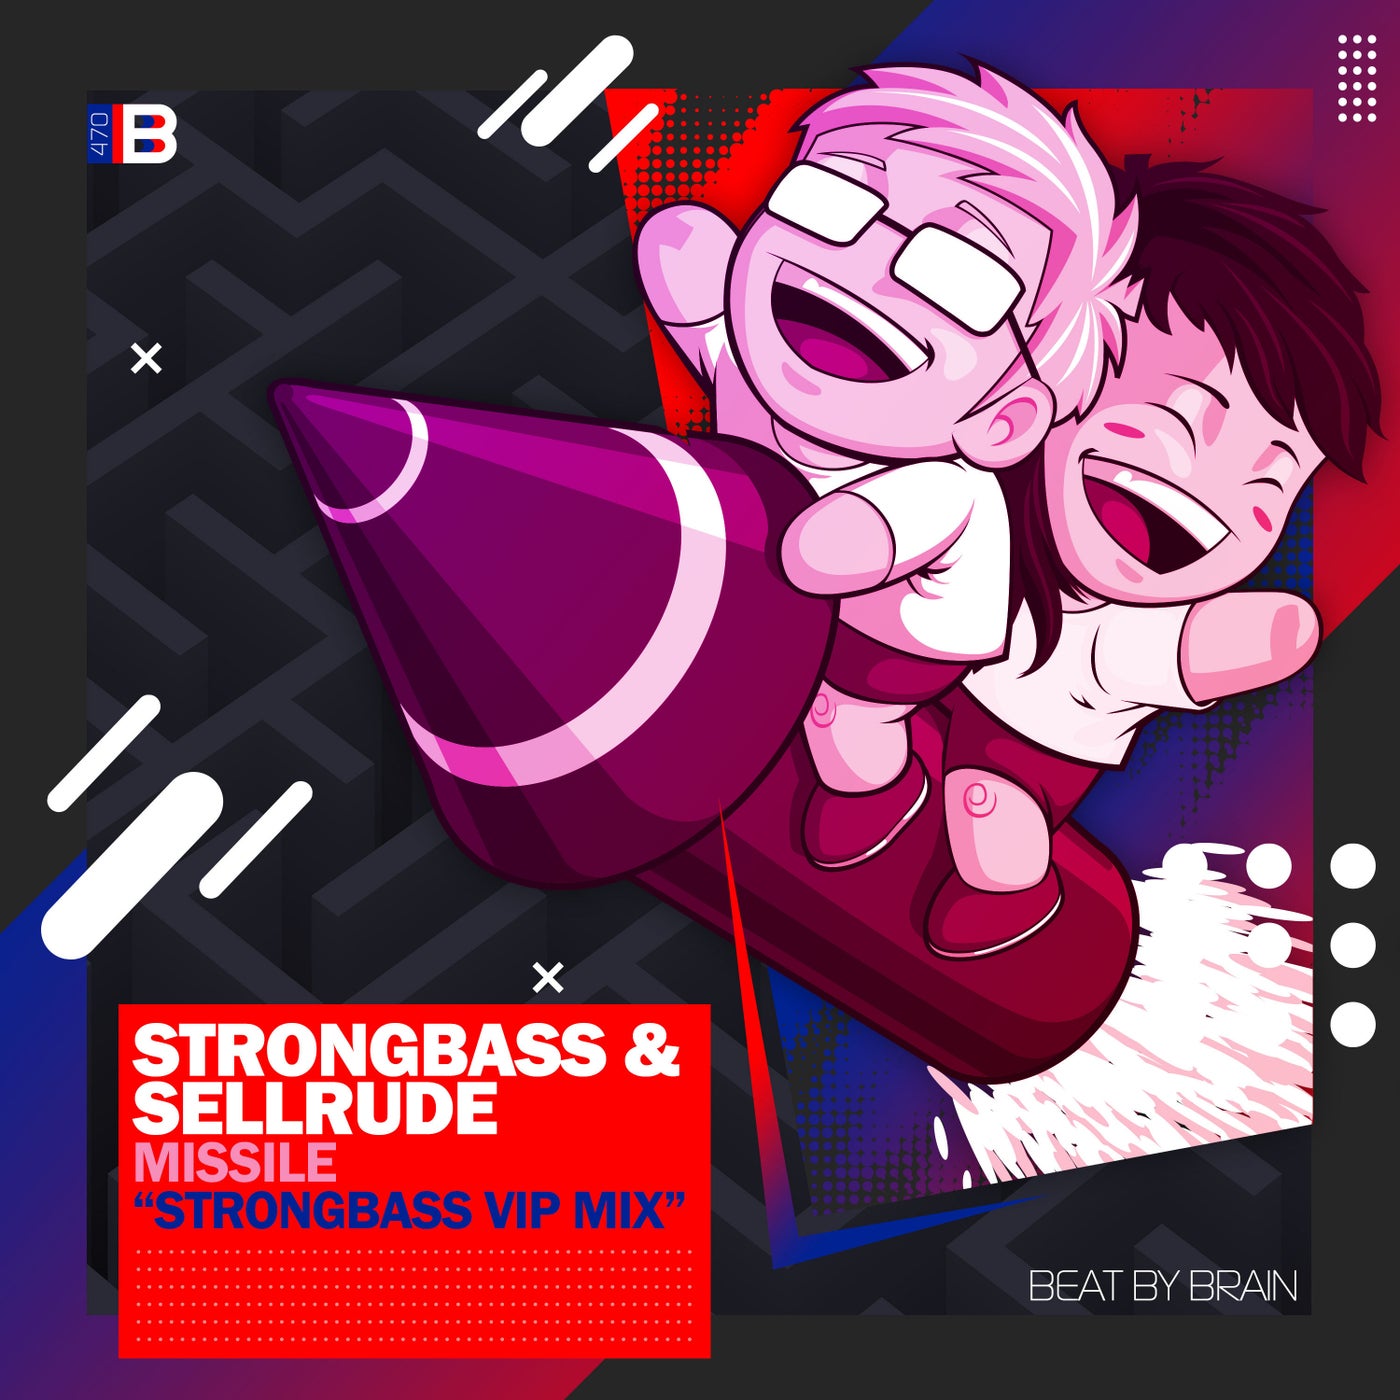 Missile (Strongbass VIP Mix)